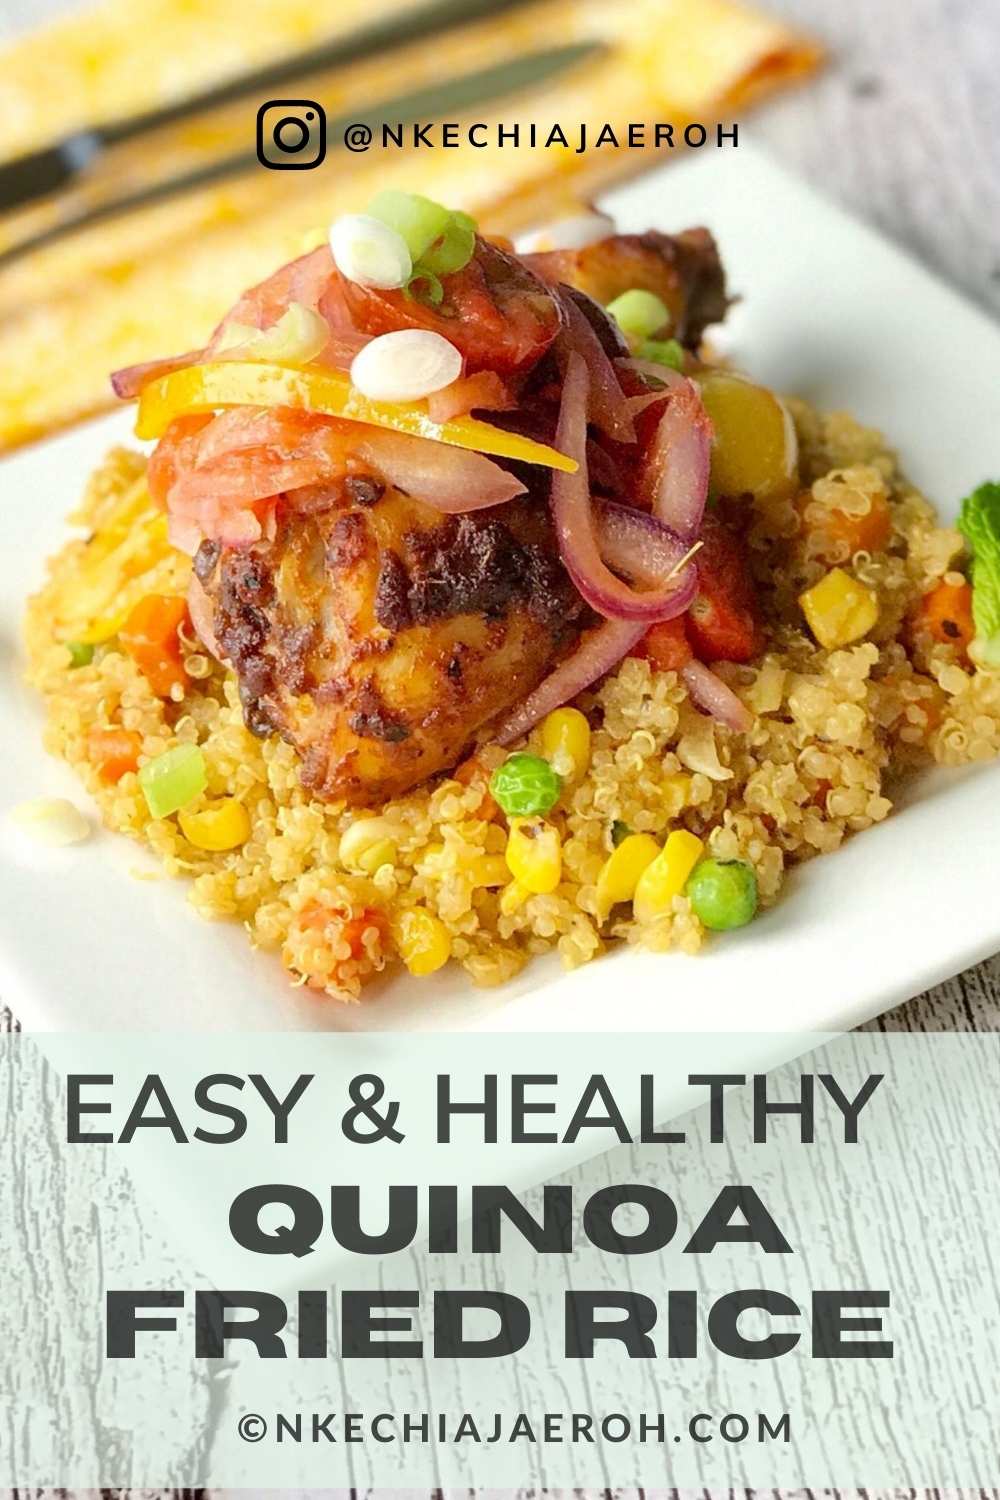 This healthy and easy quinoa fried rice is a perfect weekday lunch or dinner to behold. Made with cooked quinoa, mixed vegetables, and served with a chicken drumstick! You can easily make this dish vegan by substituting the chicken for tofu. This super easy and healthy quinoa dish cooks in less than 20 minutes. A low-calorie hearty lunch or dinner that everyone would love! #quinoarecipe #quinoa #quinoabowl #vegetable #quinoa #friedrice